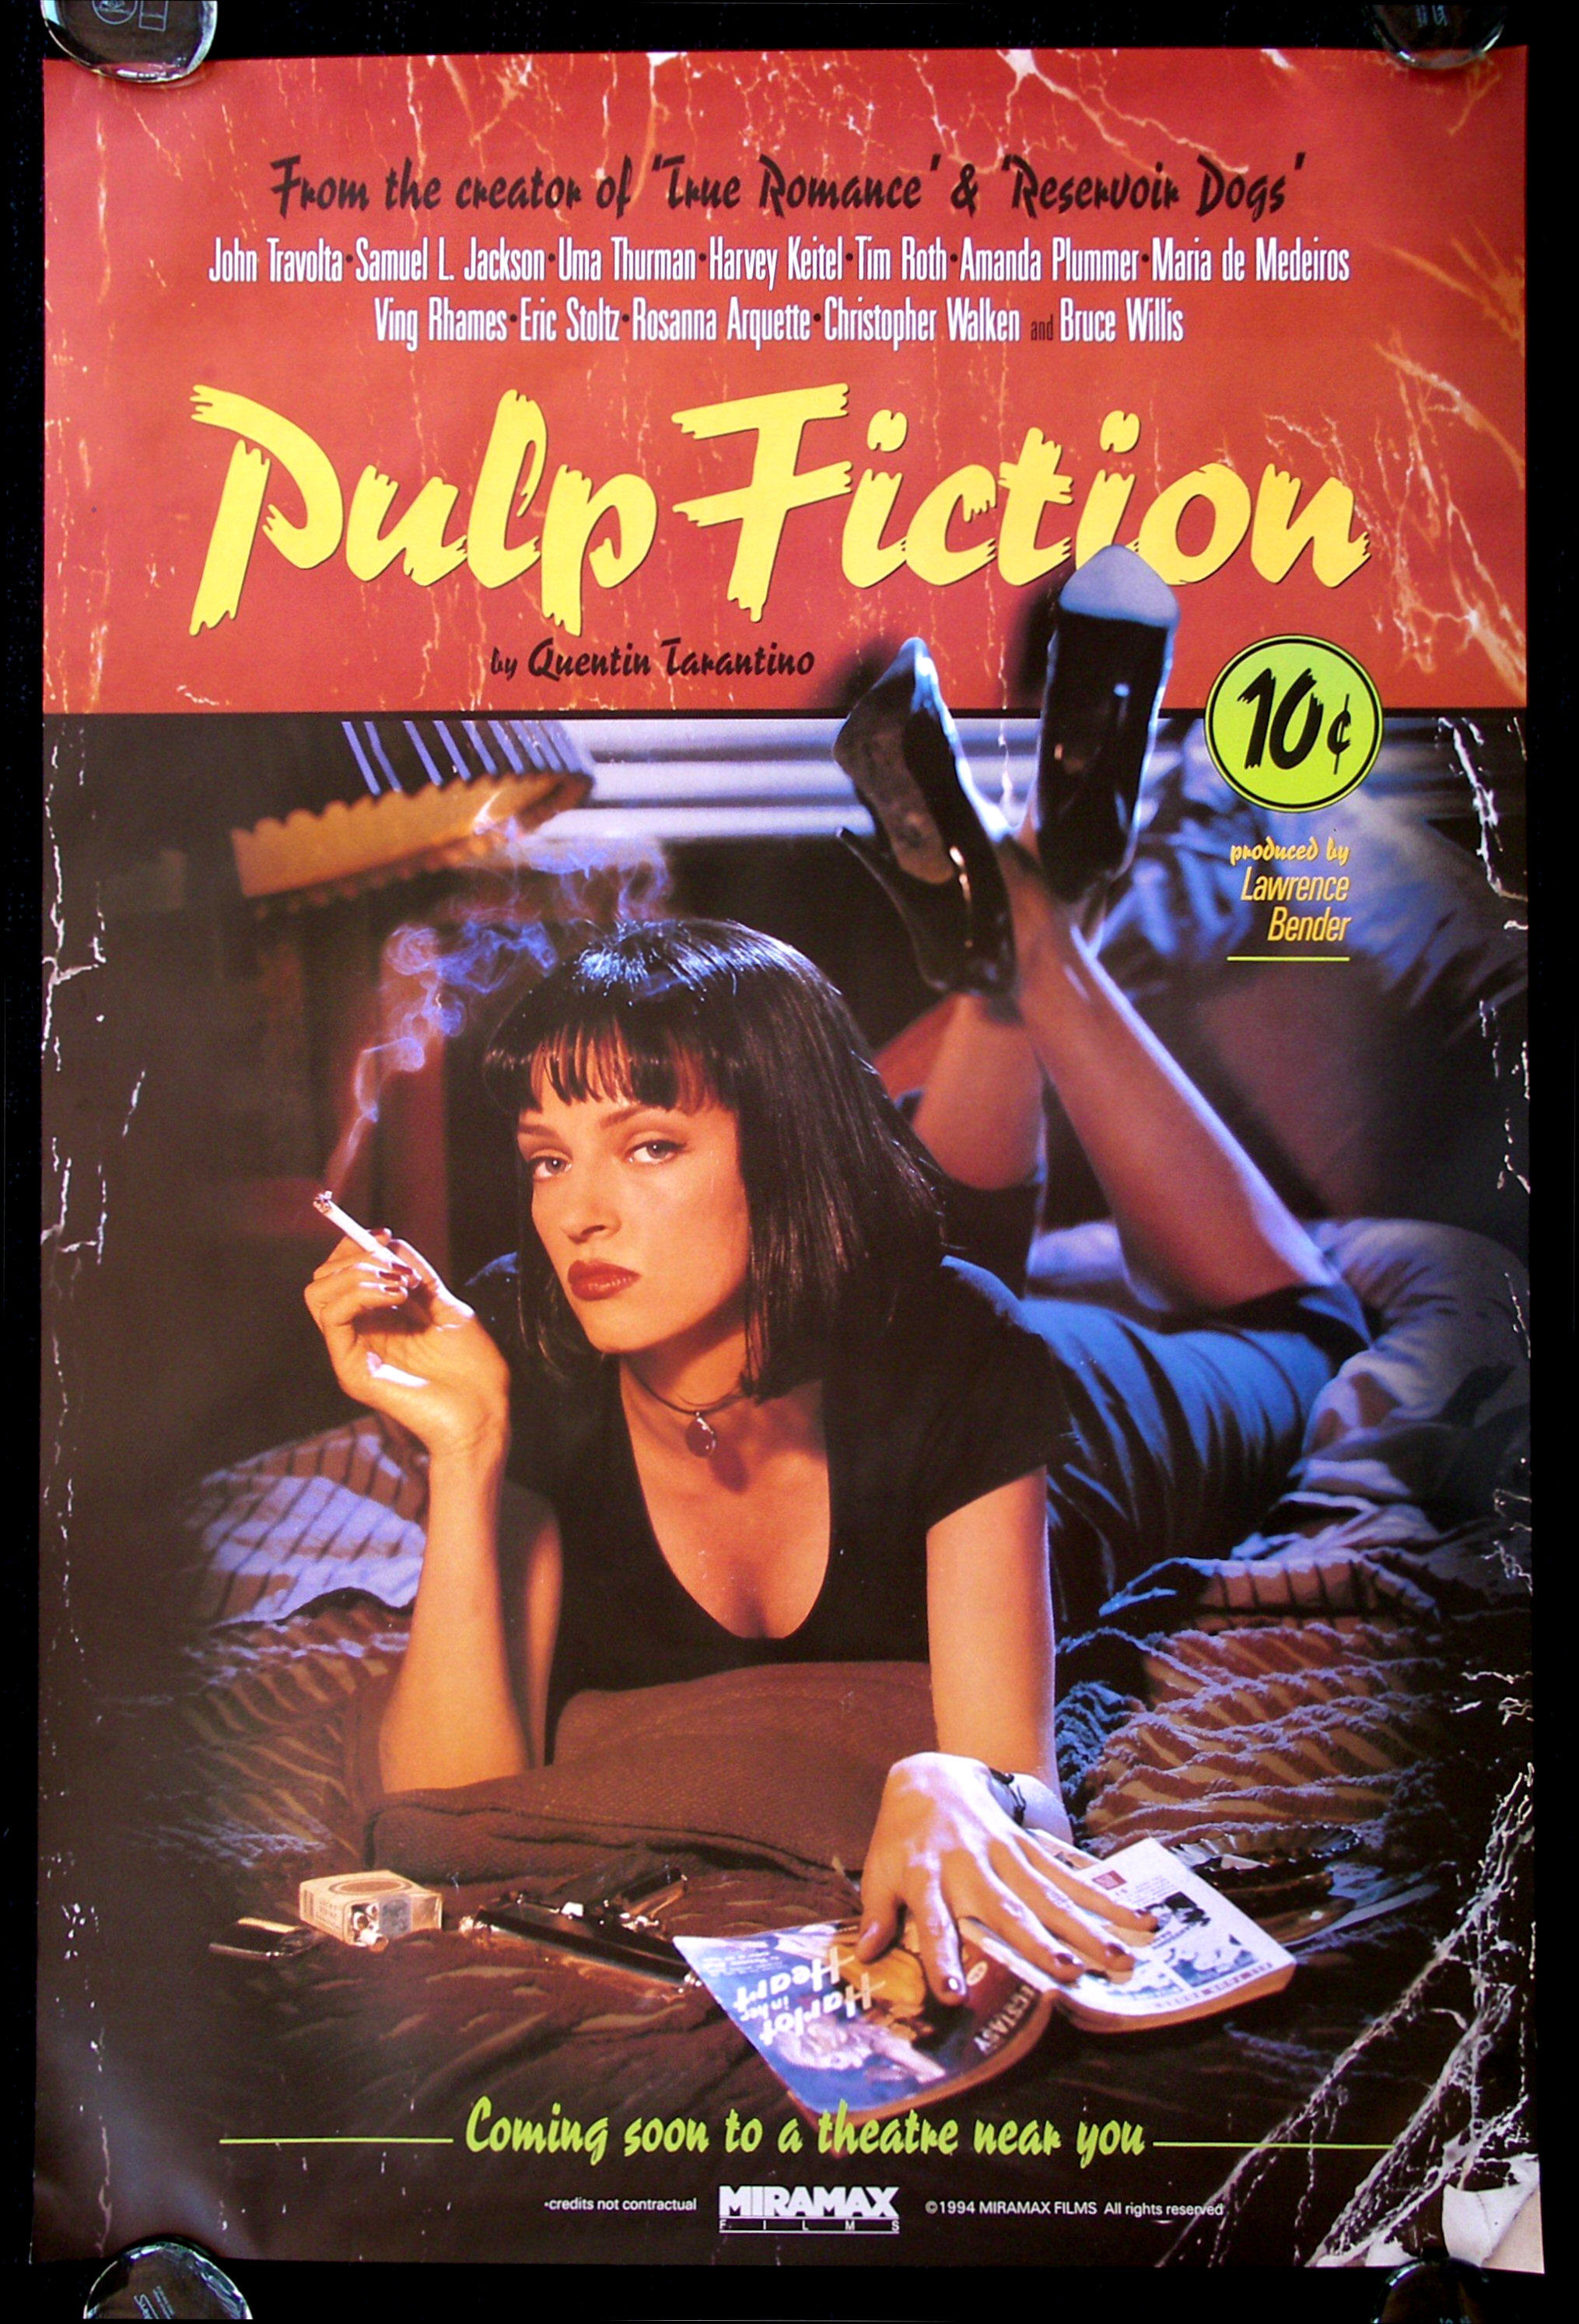 PULP FICTION, Original Tarantino Authenticated Movie Theater Poster For  Sale - Original Vintage Movie Posters